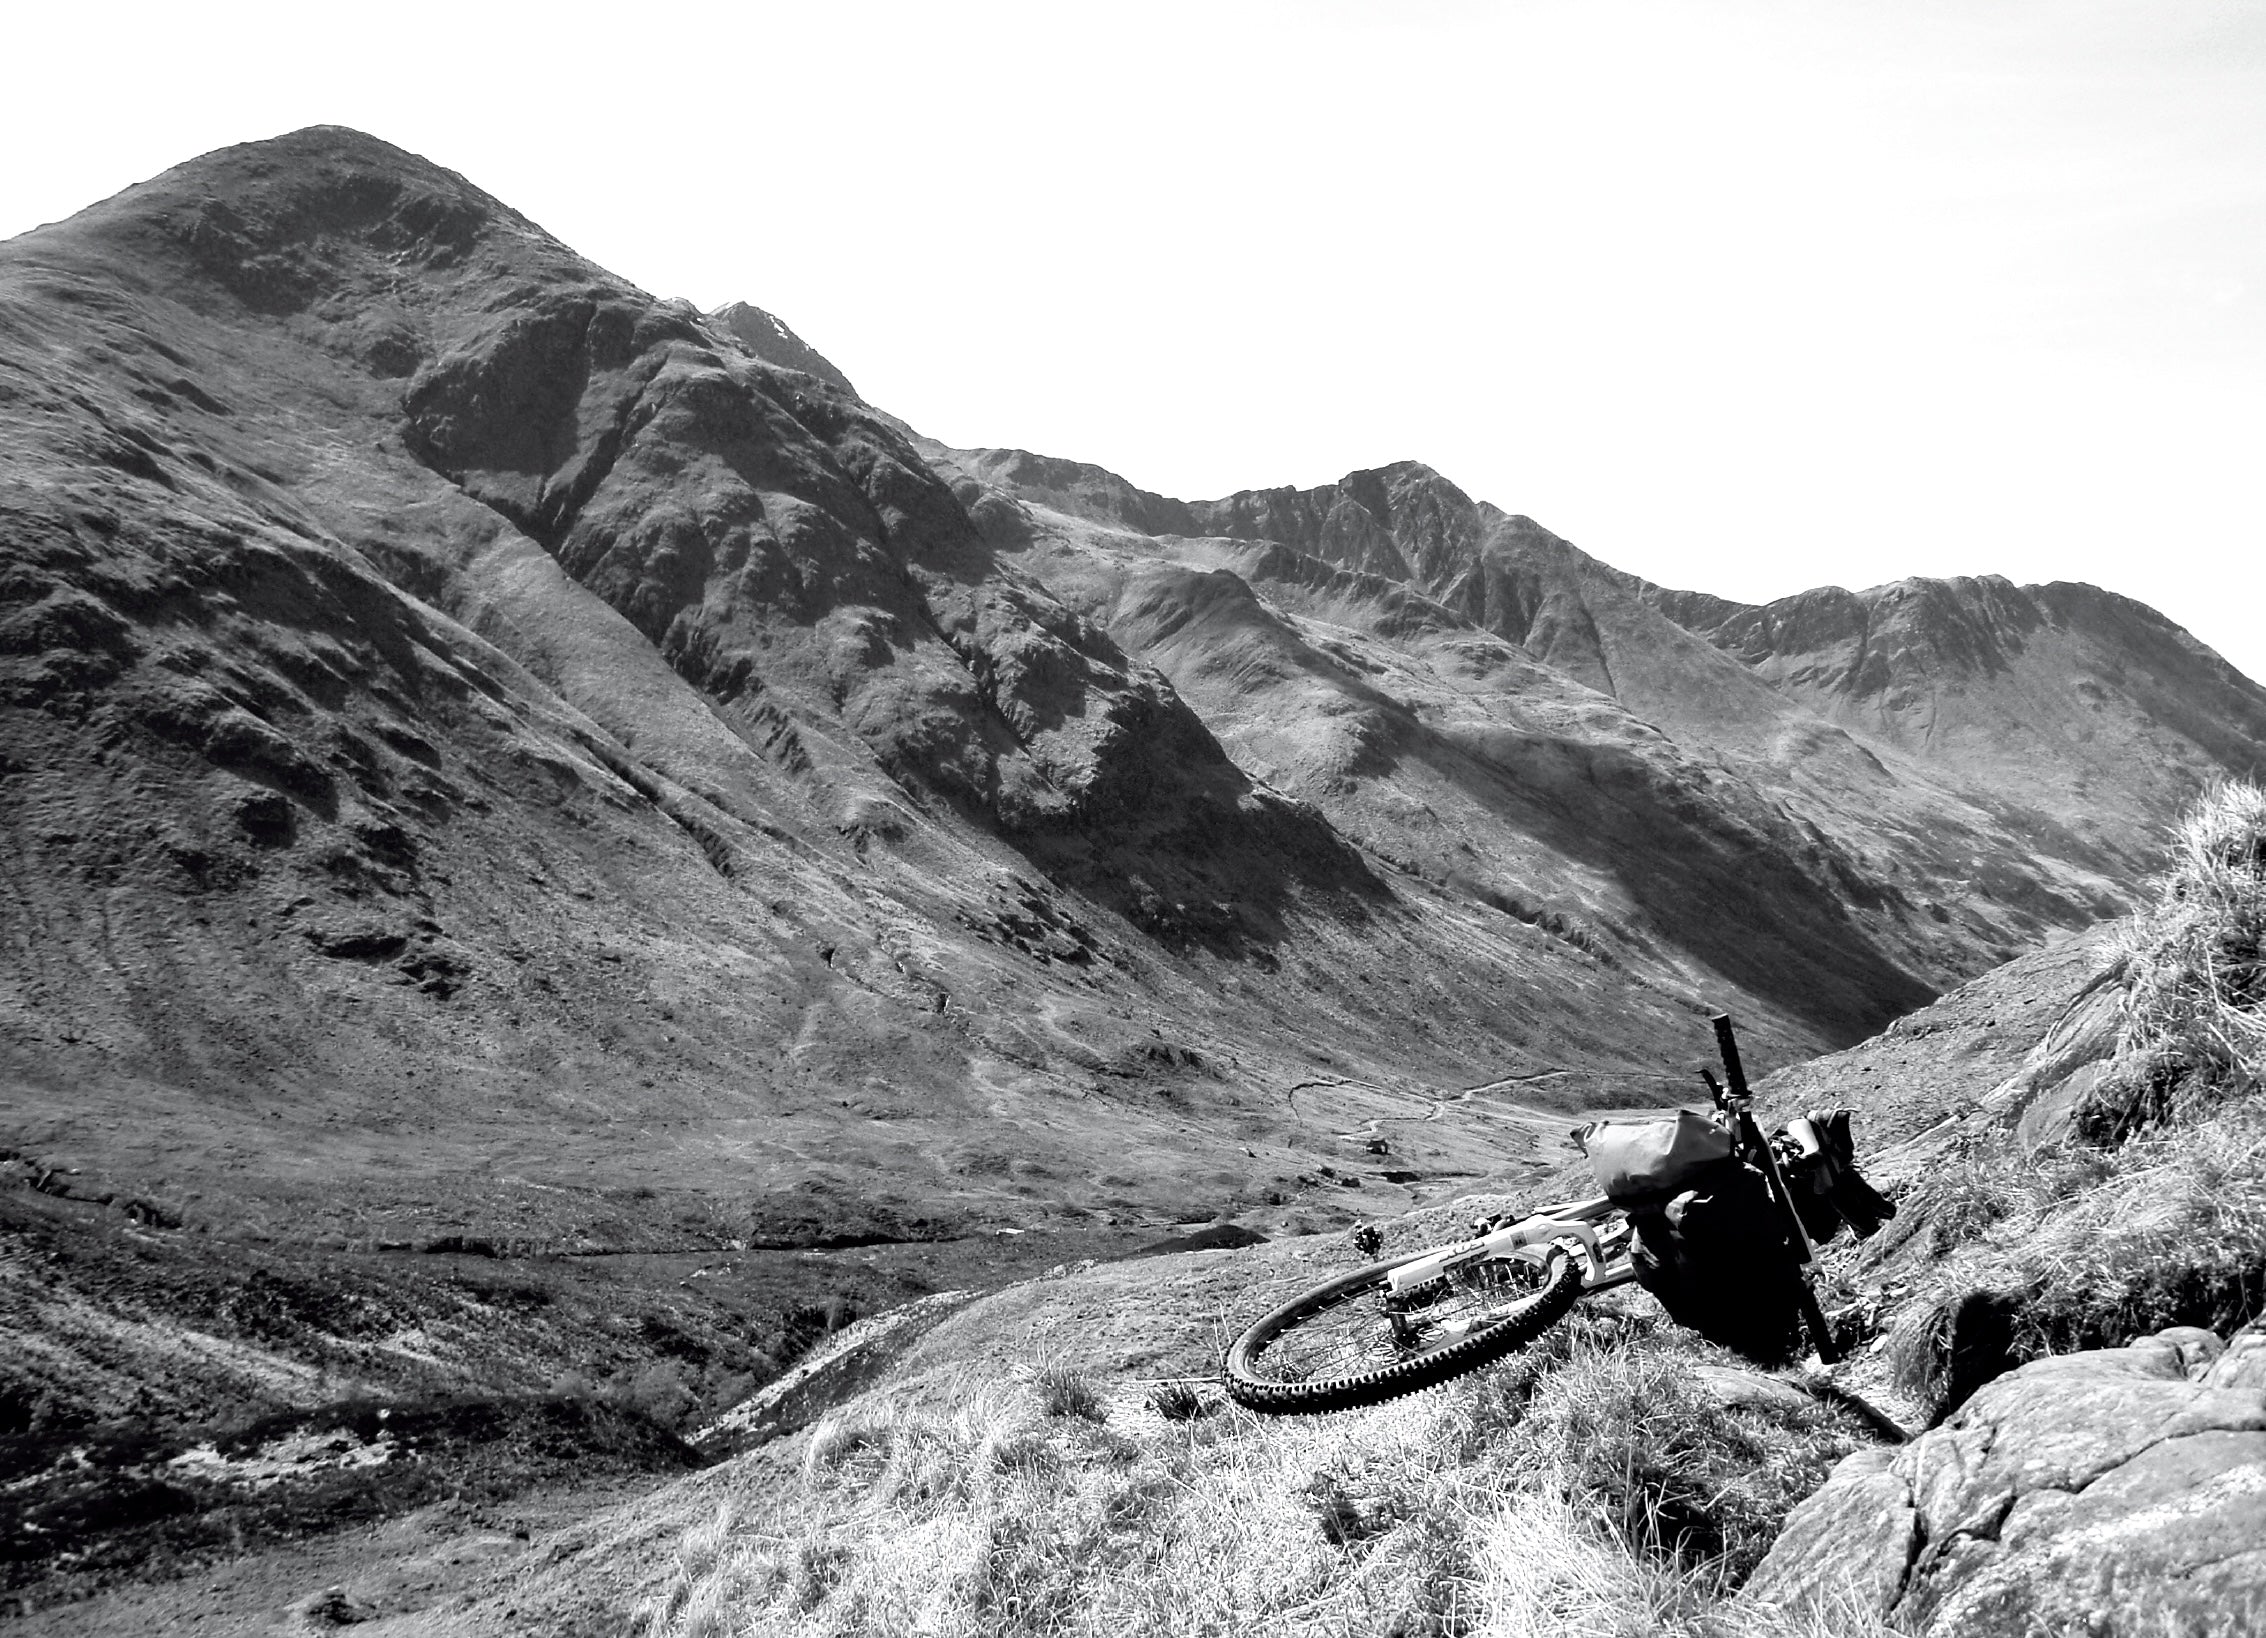 Looking to the Five Sisters of Kintail while riding the Scottish Coast-to-Coast in 2010.